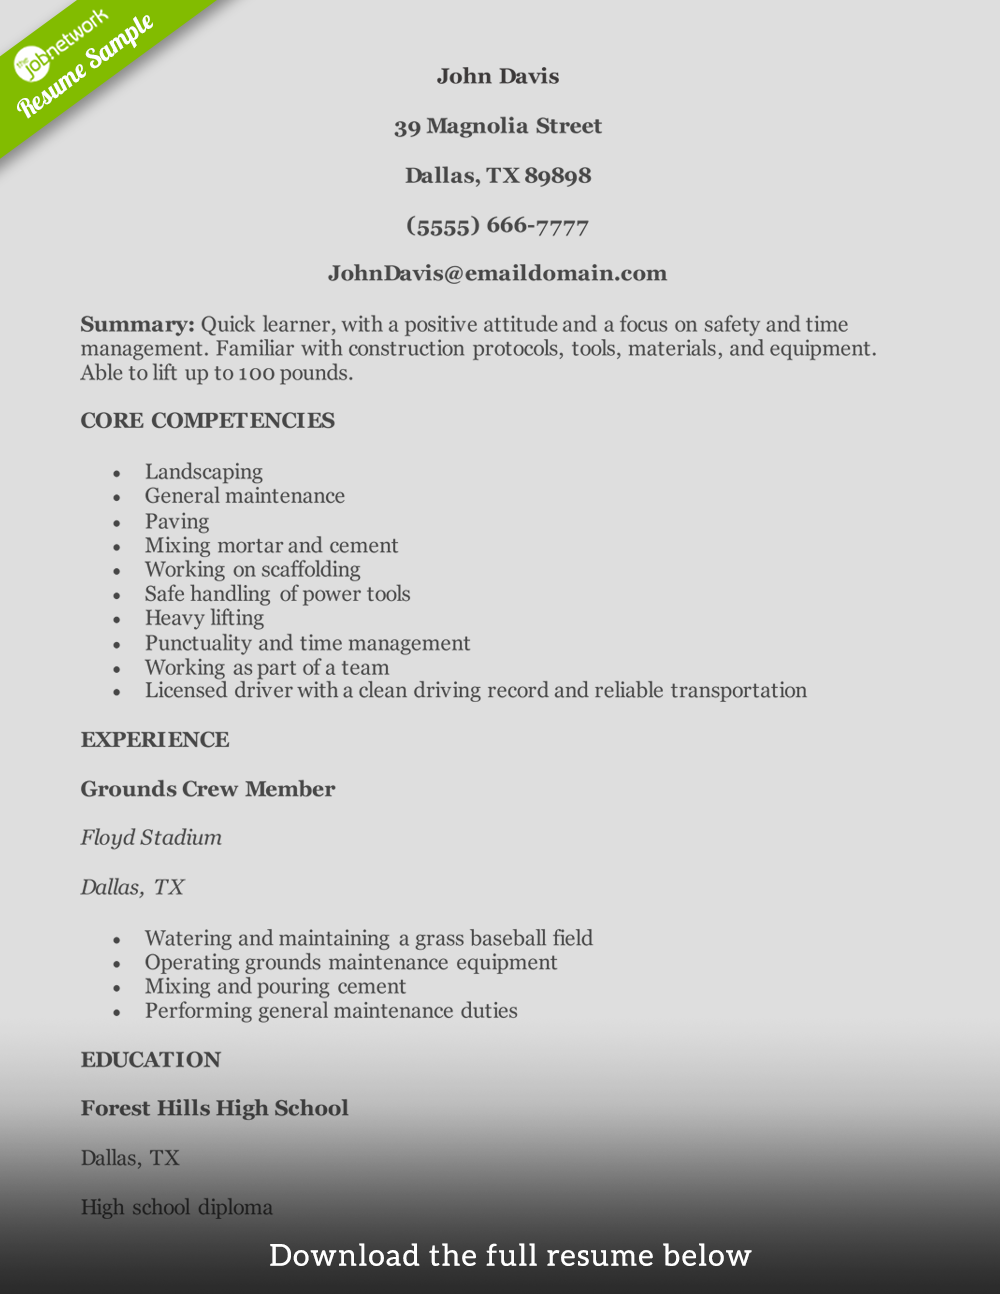 How To Write A Resume Construction Resume Helper how to write a resume|wikiresume.com